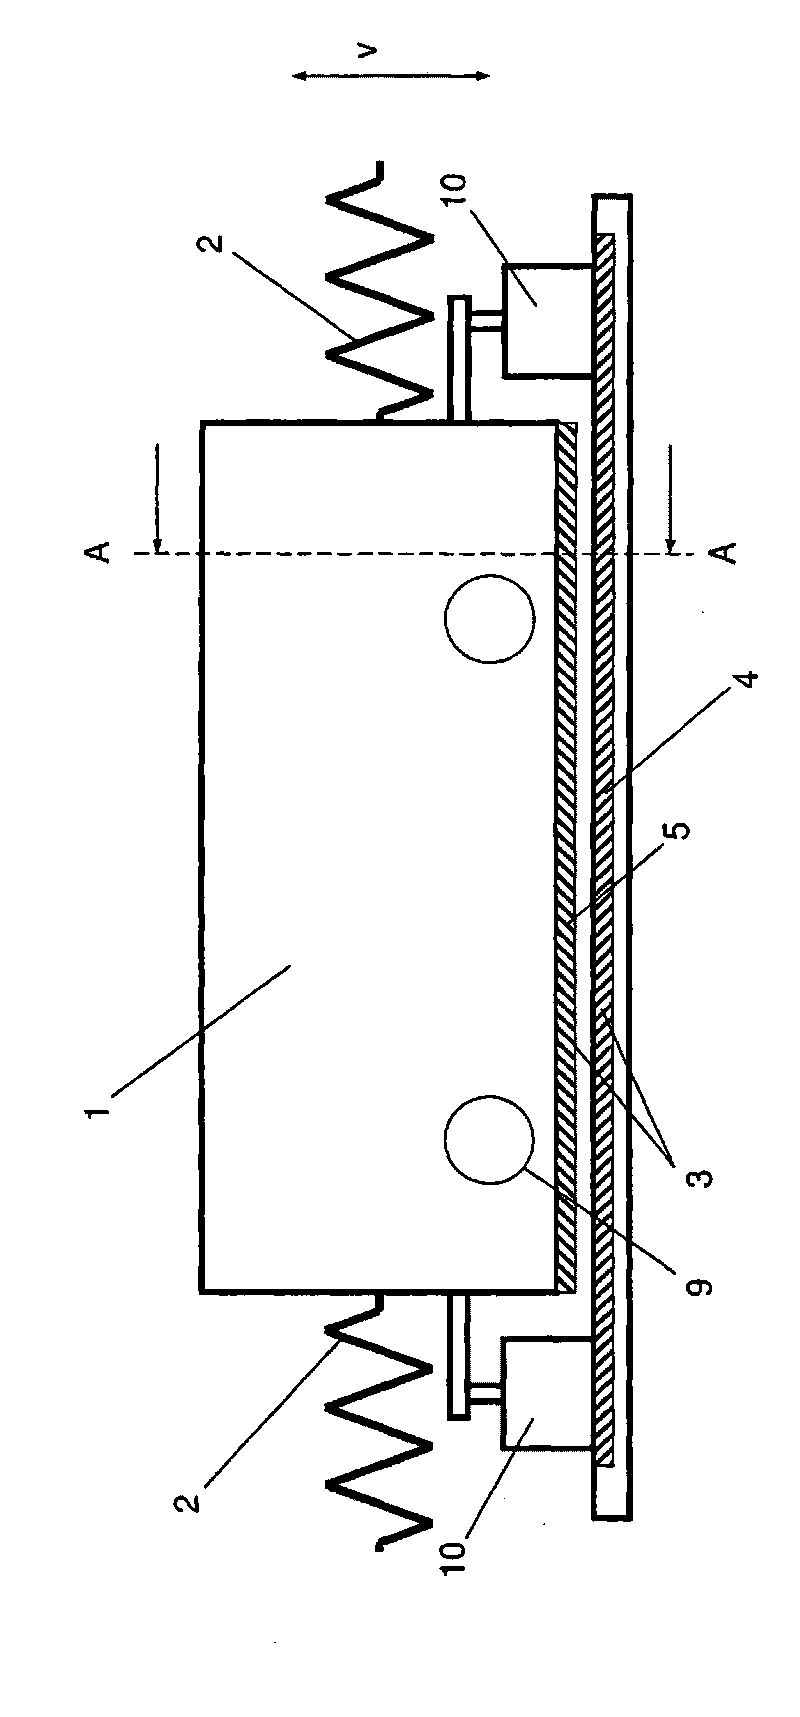 Method for damping vibrations acting on object to be protected e.g. building, involves partially absorbing static dead weight of vibrating mass by magnetic forces that act between elements of vibration damper